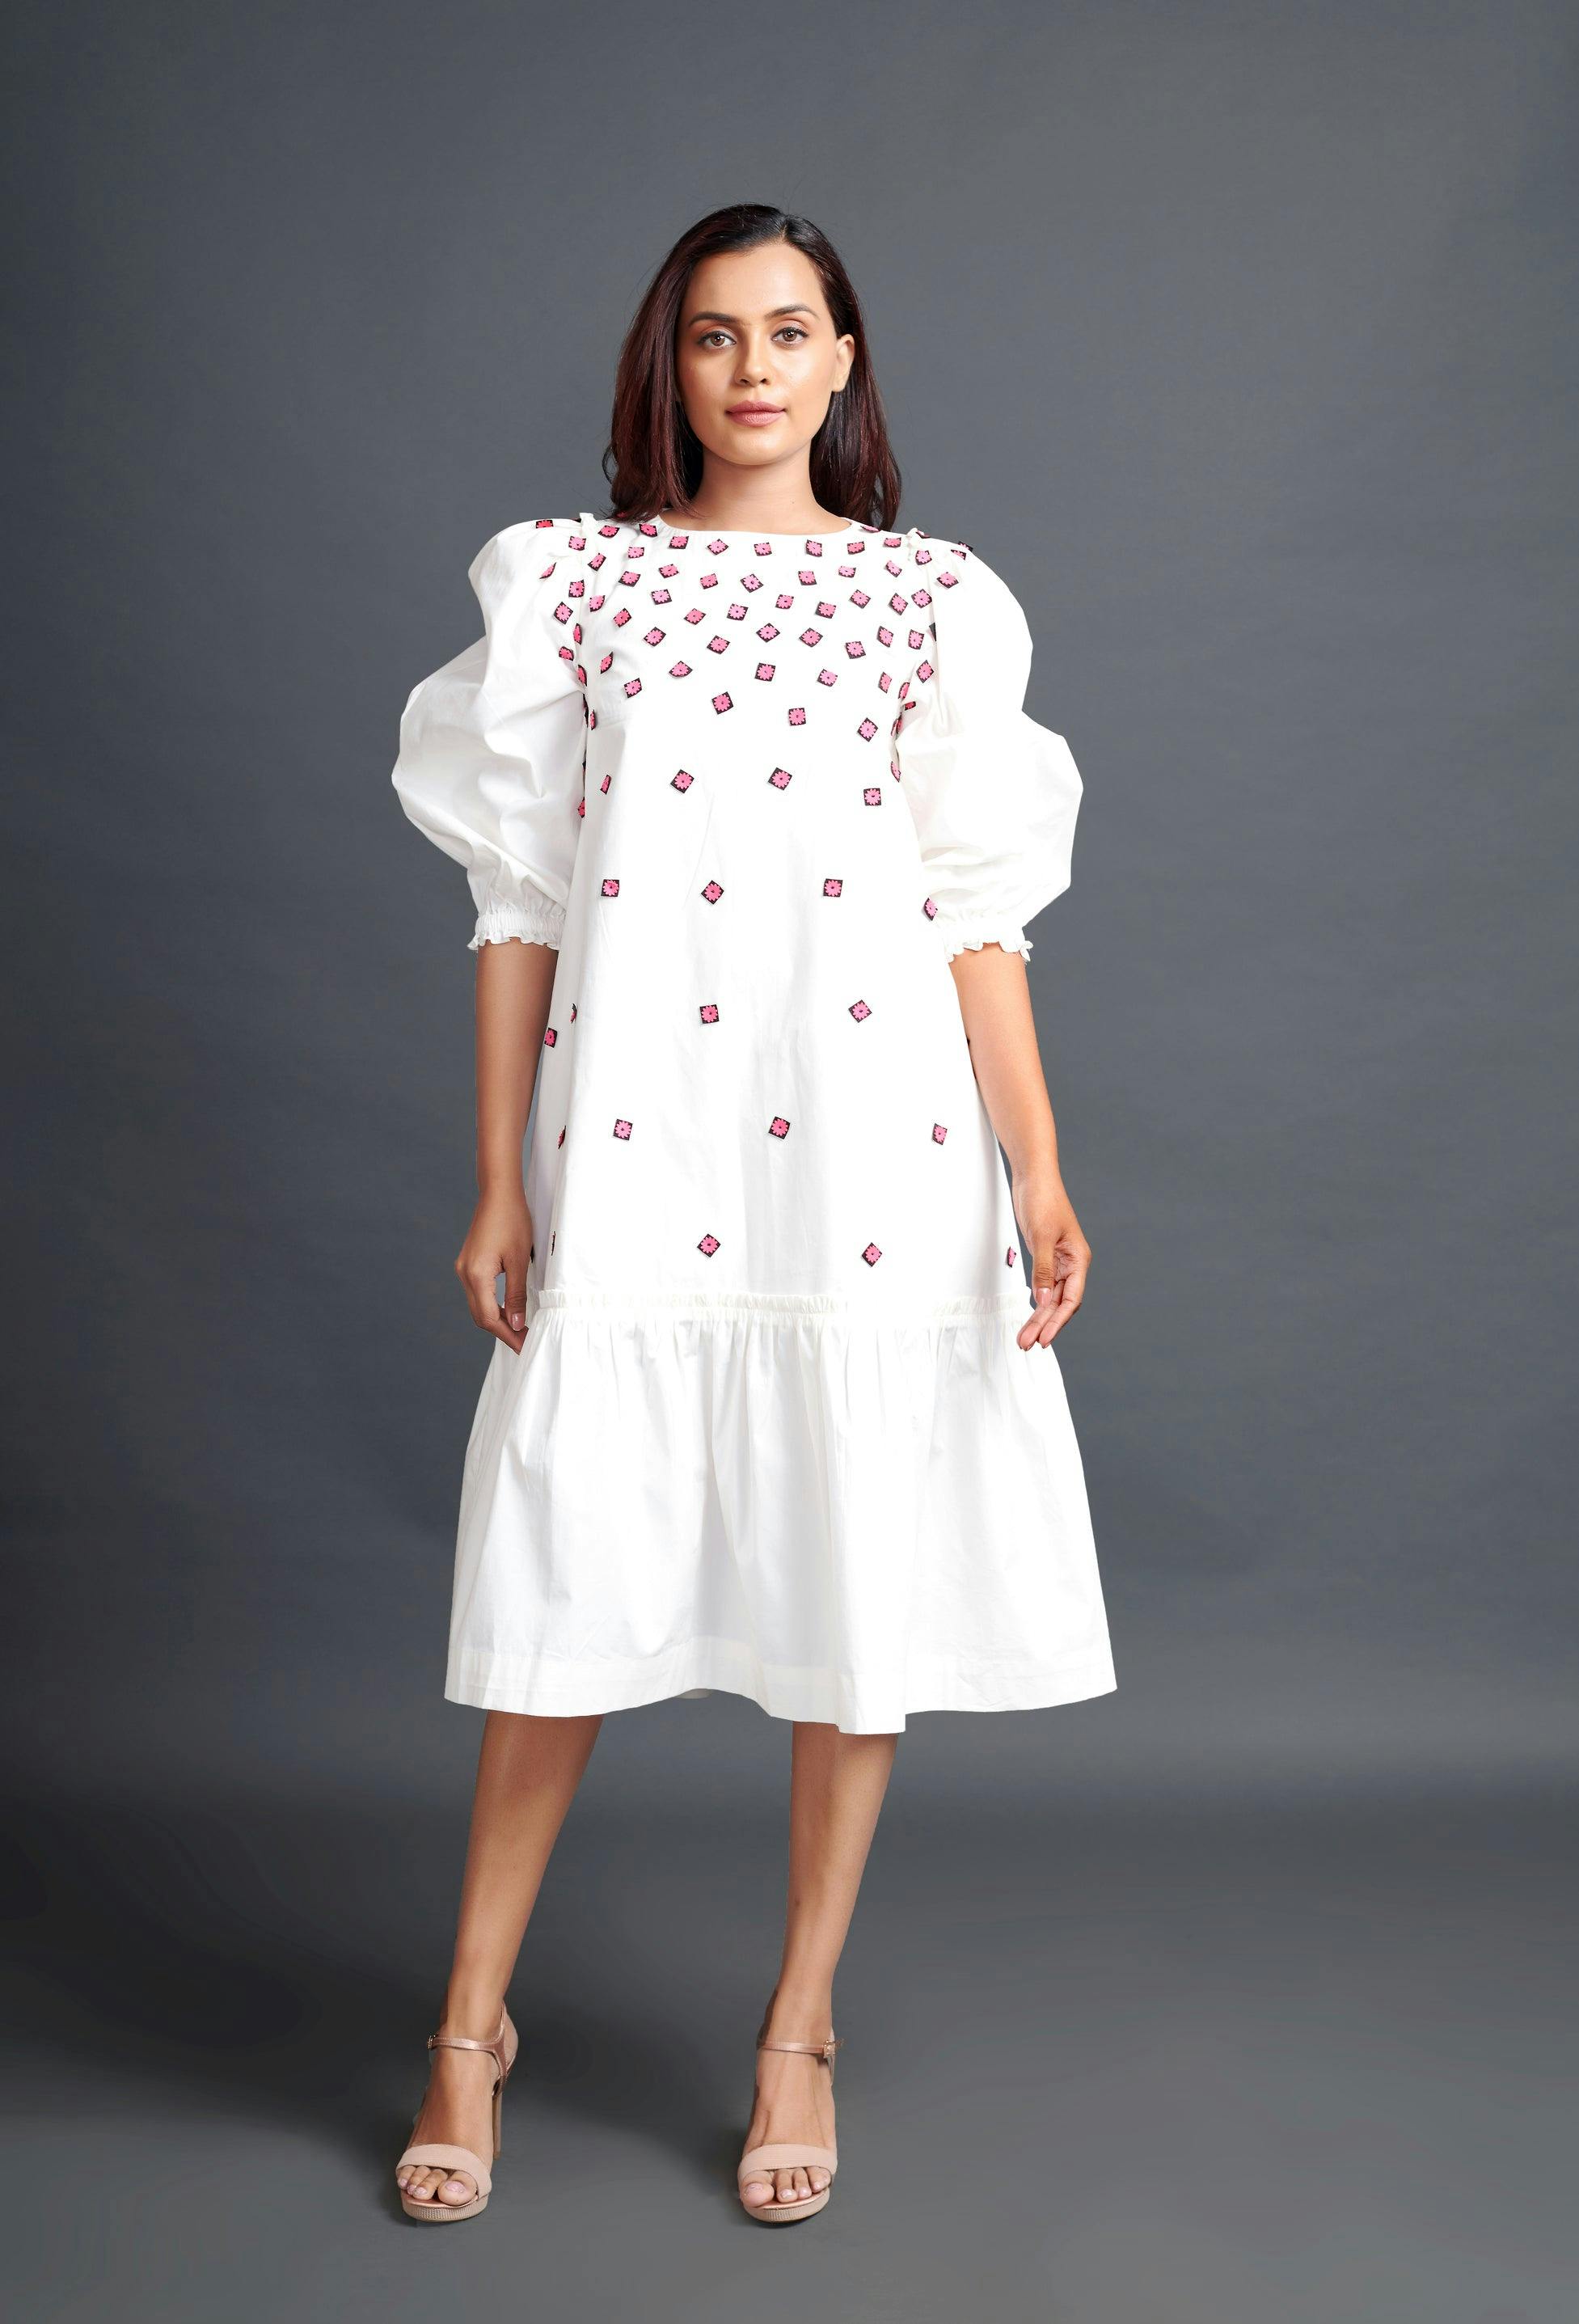 WF-1101-WHITE ::: White Long Dress With Embroidery, a product by Deepika Arora